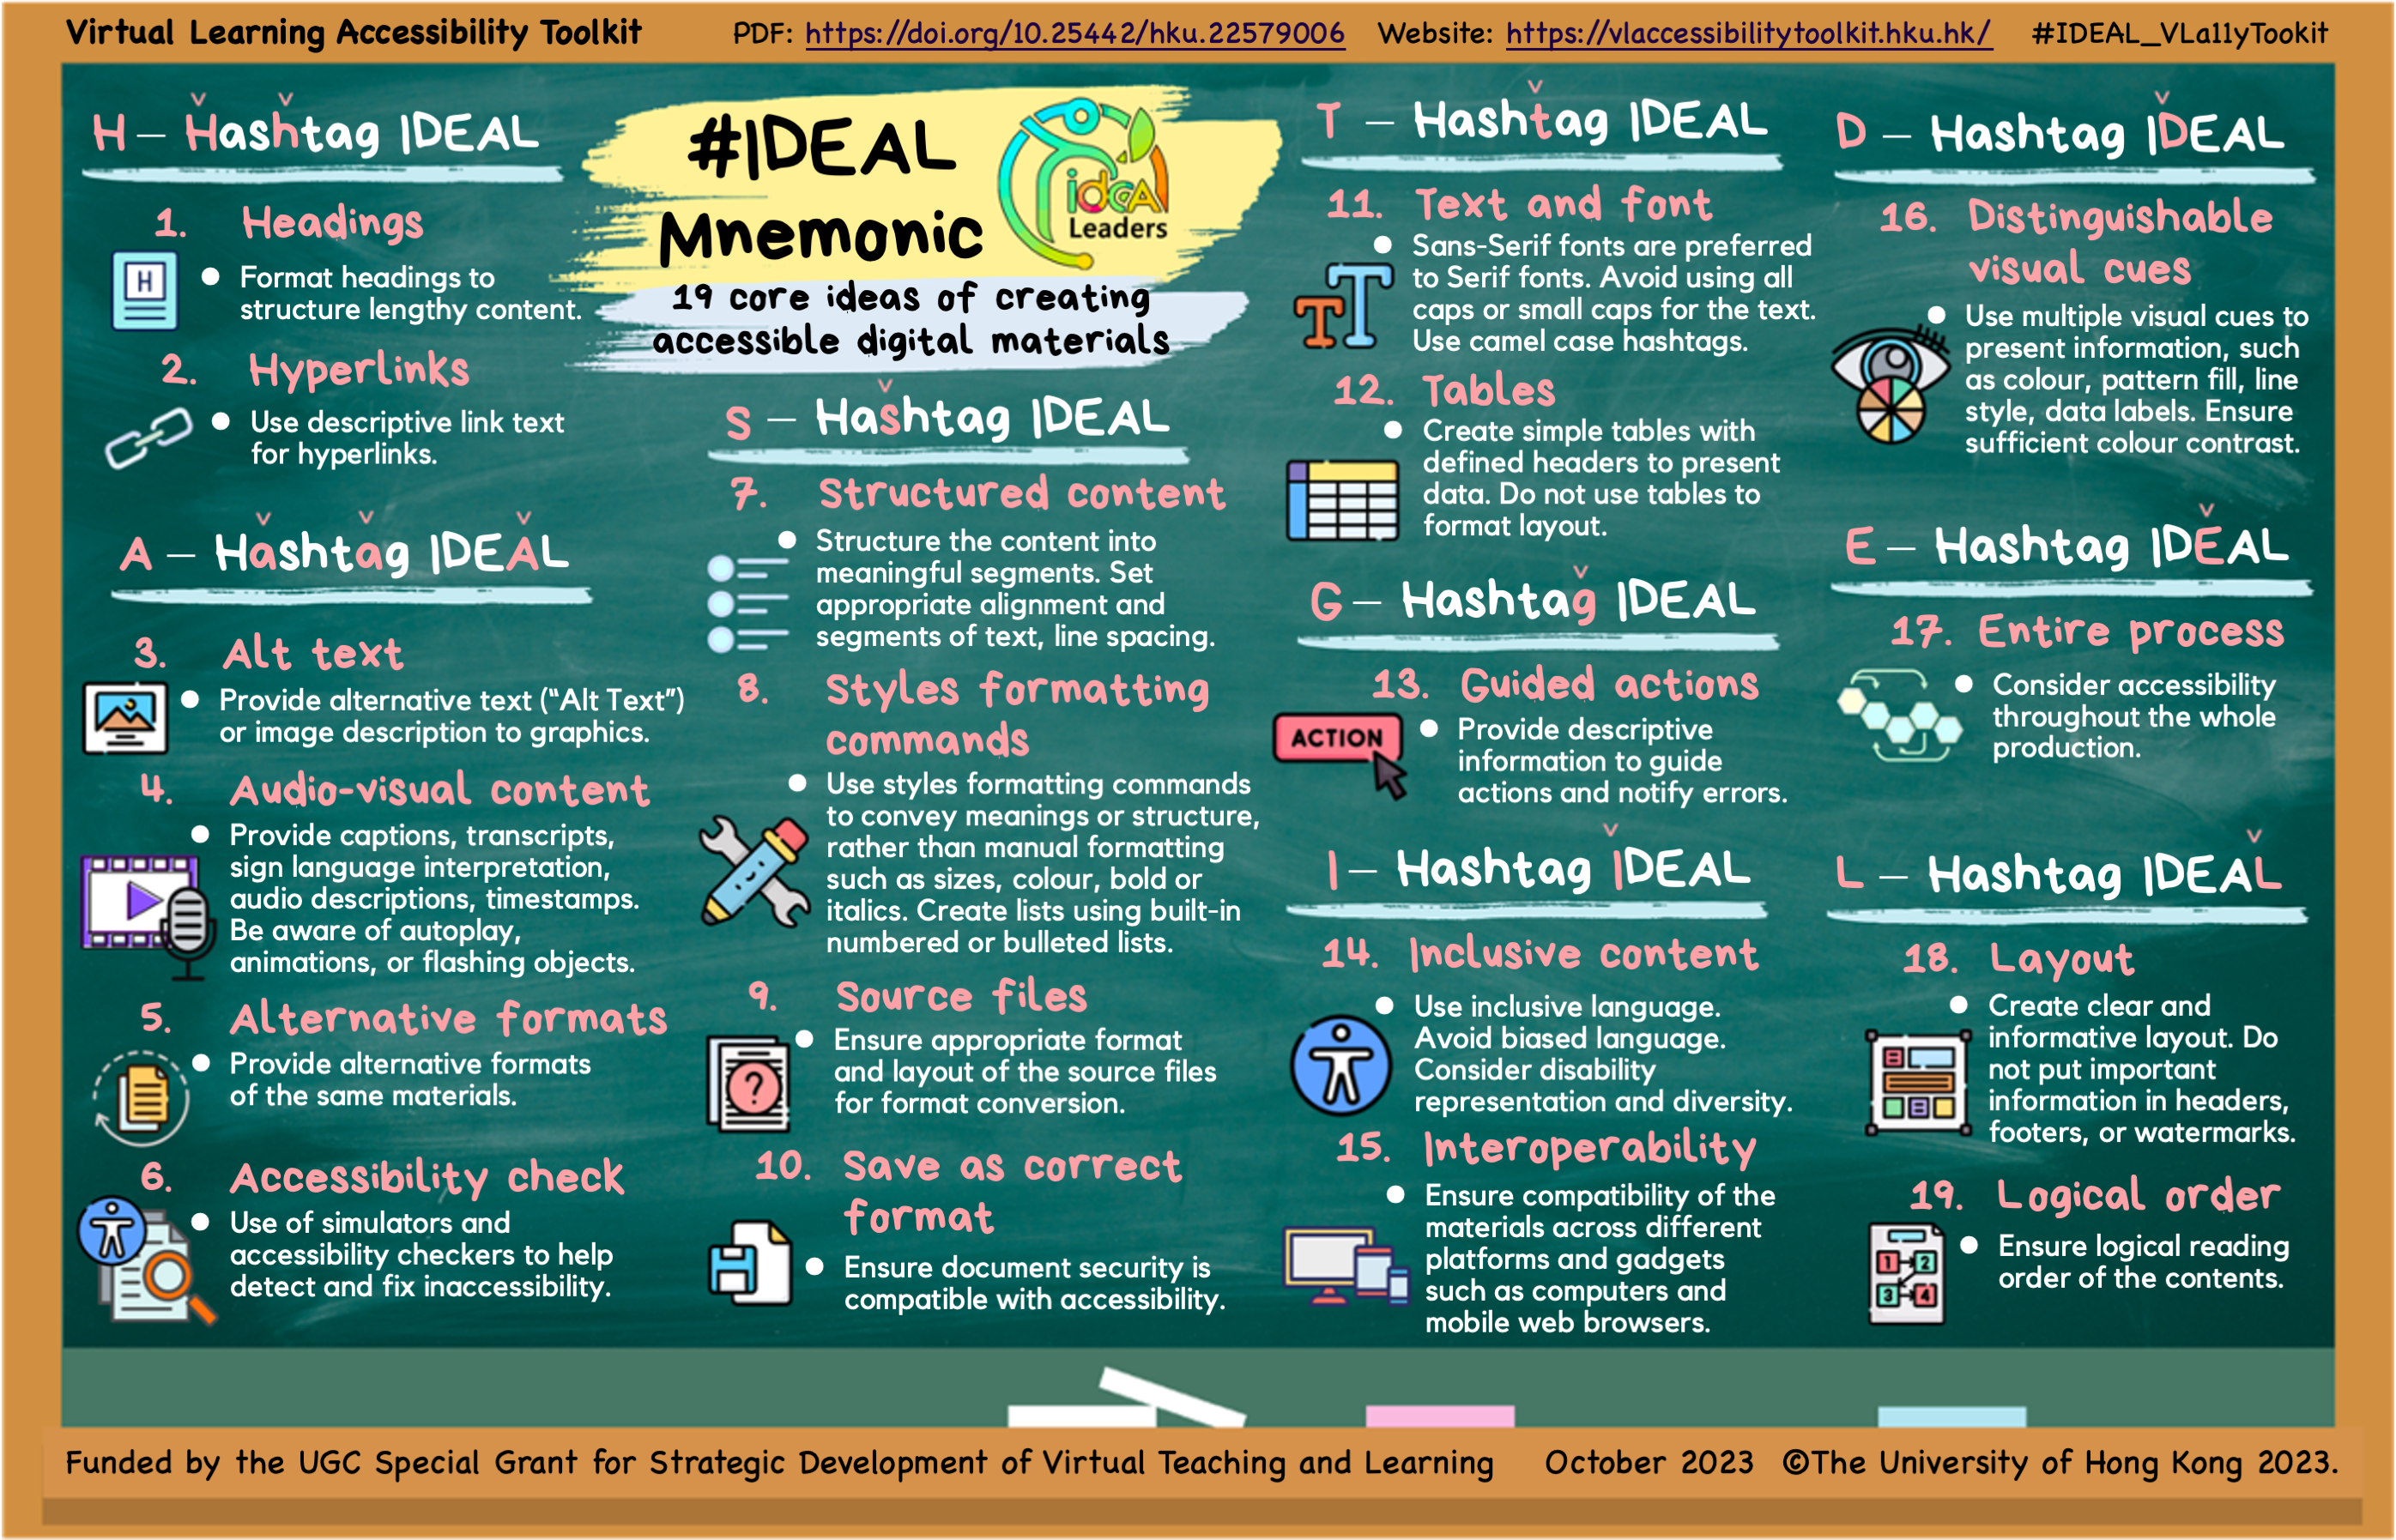 A list of 19 items of The #IDEAL mnemonic with icons, including 1. Headings; 2. Hyperlinks; 3. Alt text; 4. Audio-visual accessibility; 5. Alternative formats; 6. Accessibility check; 7. Structured content; 8. Styles formatting commands; 9. Source files; 10. Save as correct format; 11. Text and font;. 12. Tables; 13. Guided actions;. 14. Inclusive language and content;. 15. Interoperability; 16. Distinguishable visual cues;. 17. Entire process; 18. Layout; and 19. Logical order.